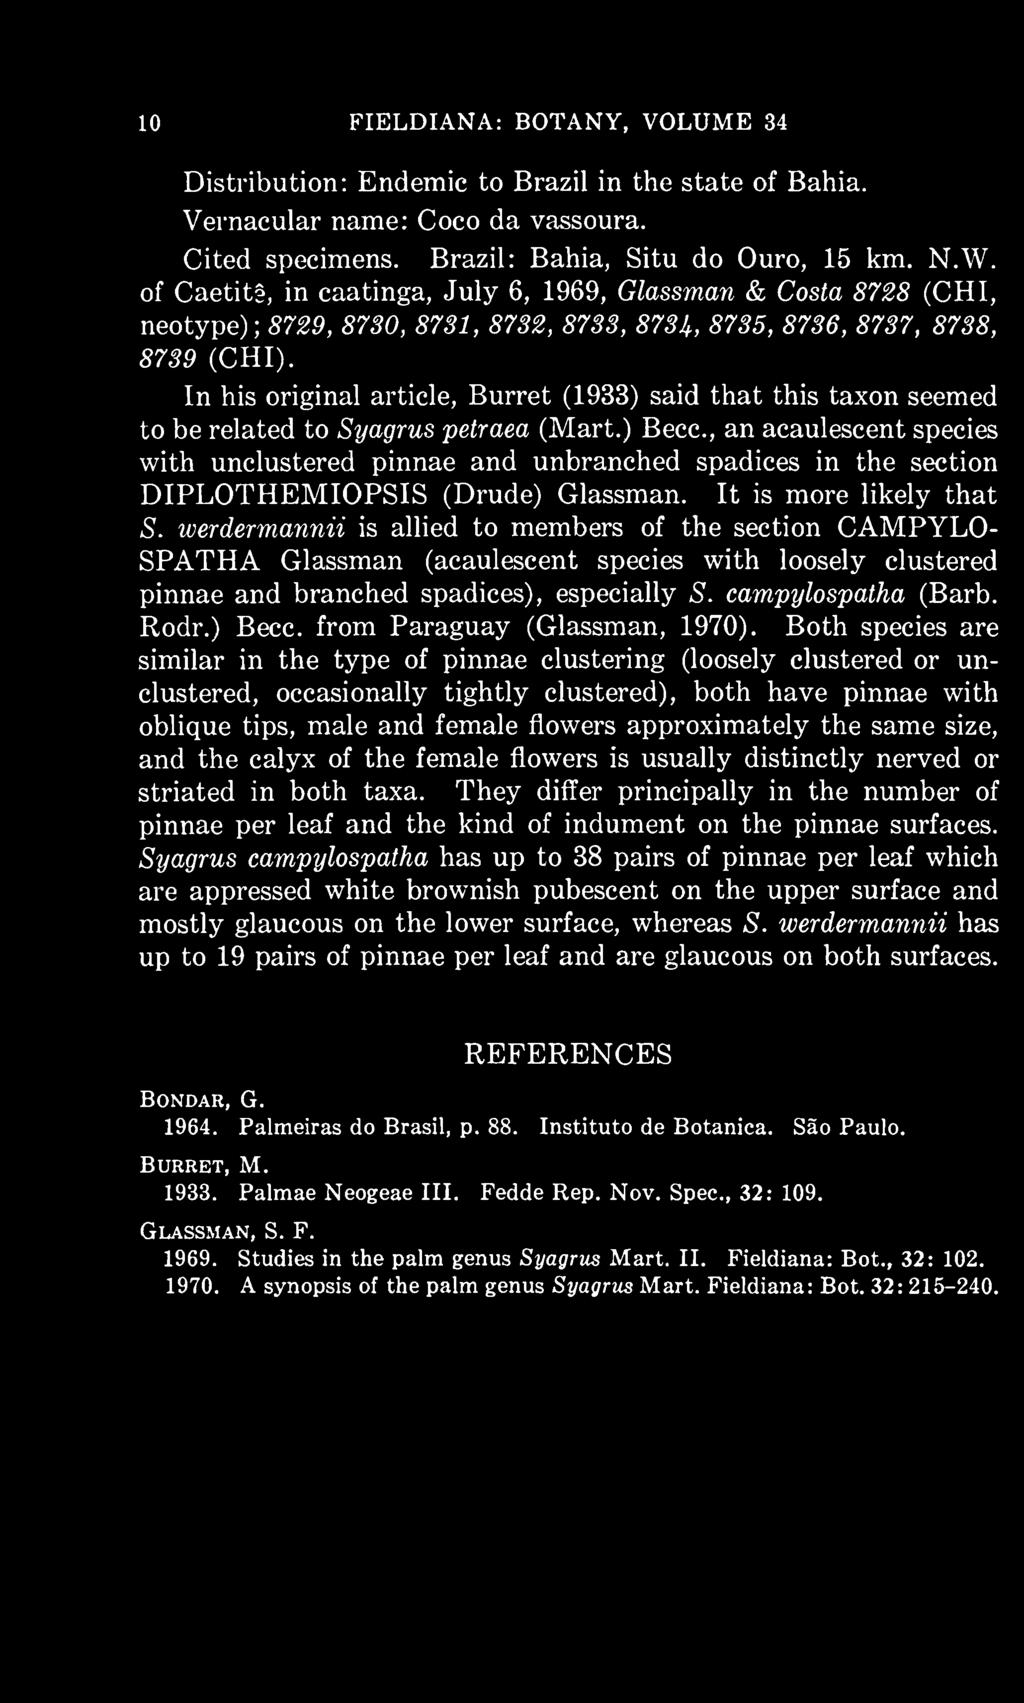 In his original article, Burret (1933) said that this taxon seemed to be related to Syagrus petraea (Mart.) Becc.